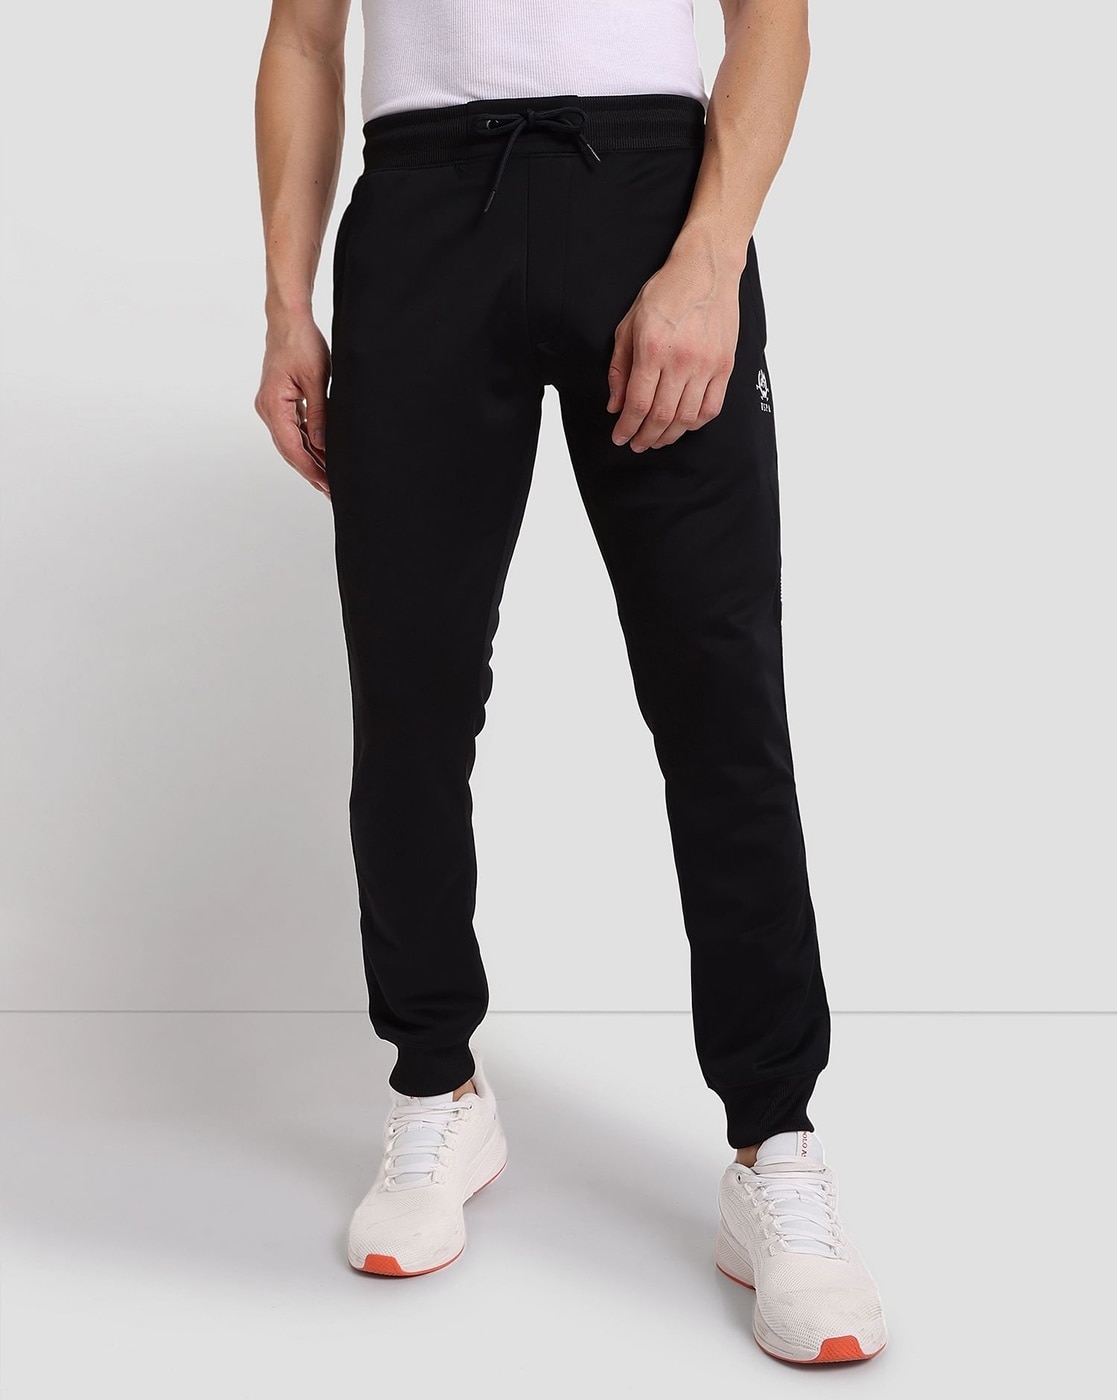 Buy Black Track Pants for Men by U.S. Polo Assn. Online